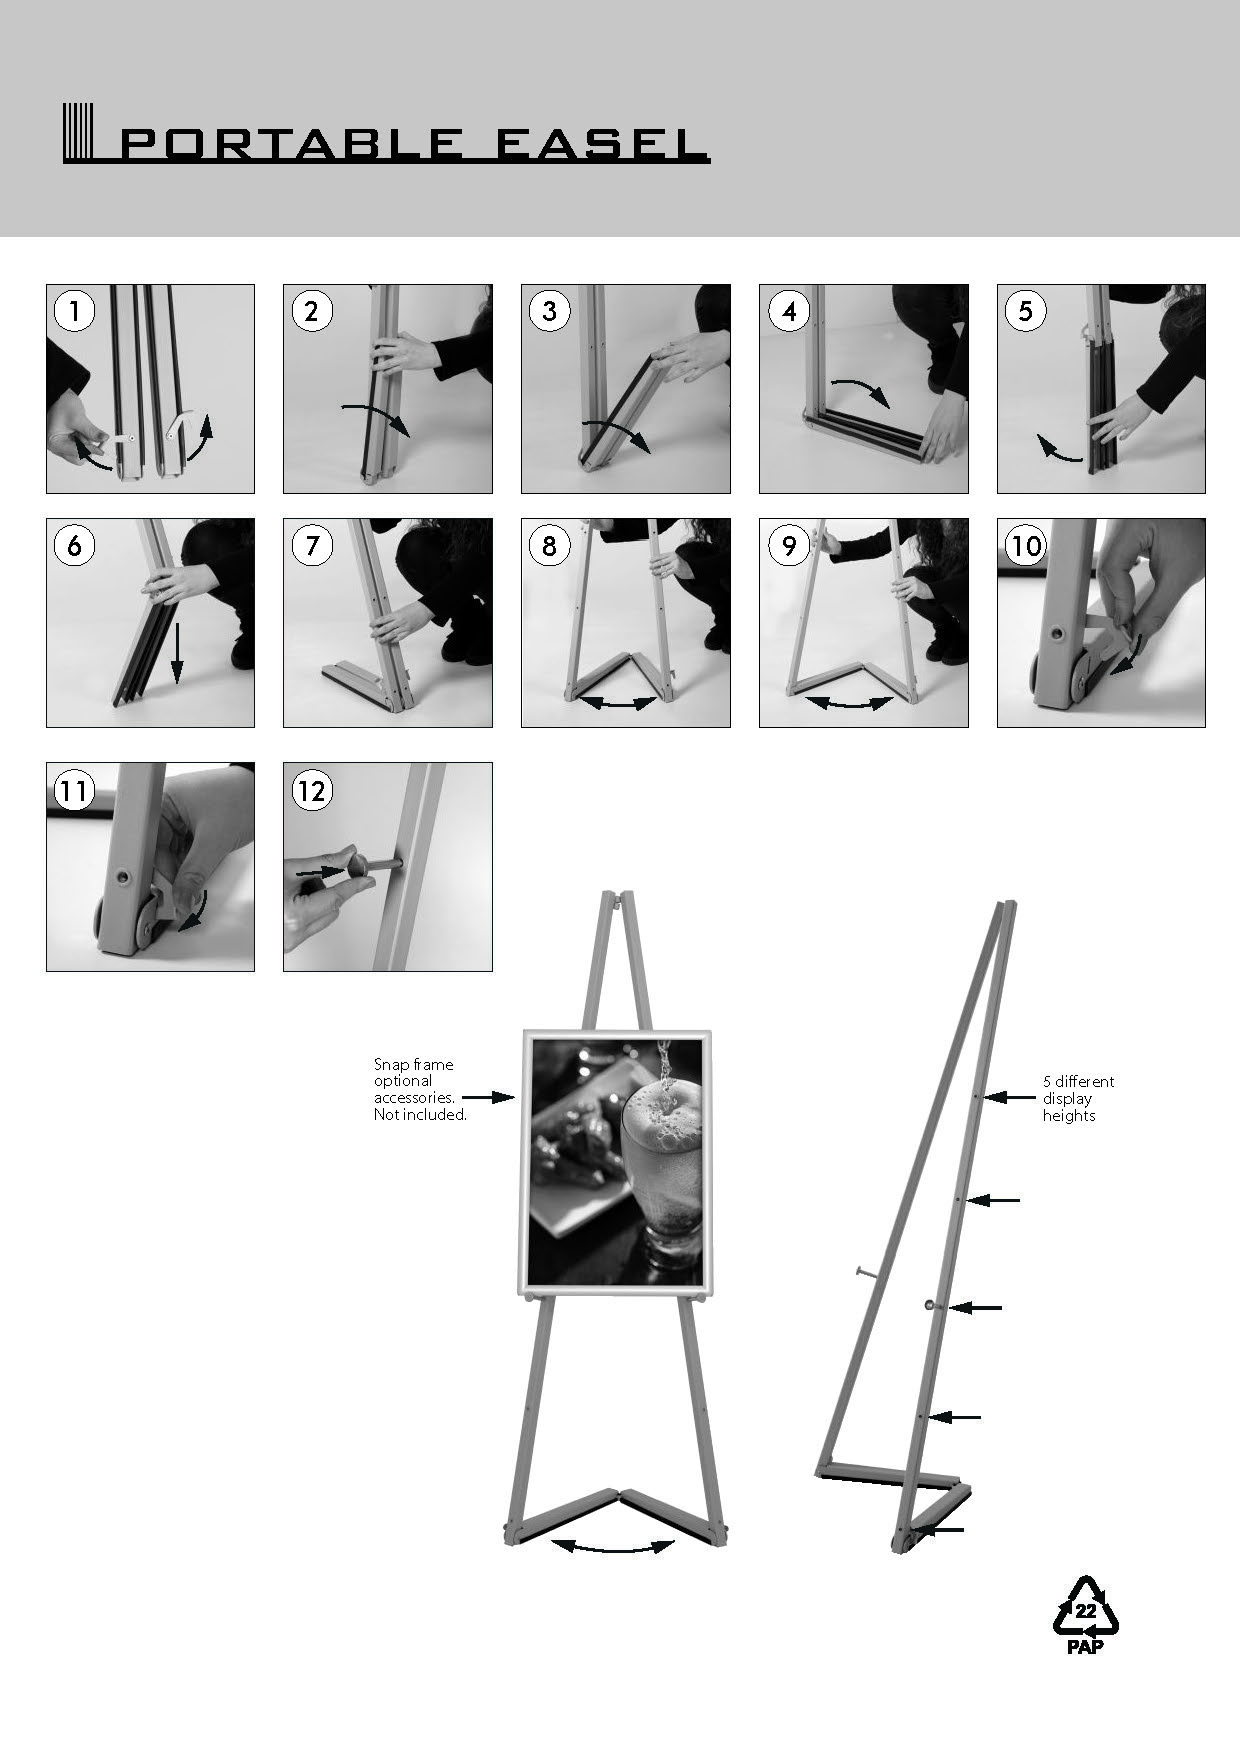 https://shop.bannerworld.com.au/images/products_gallery_images/PORTABLE-EASEL_Assembly17.jpg